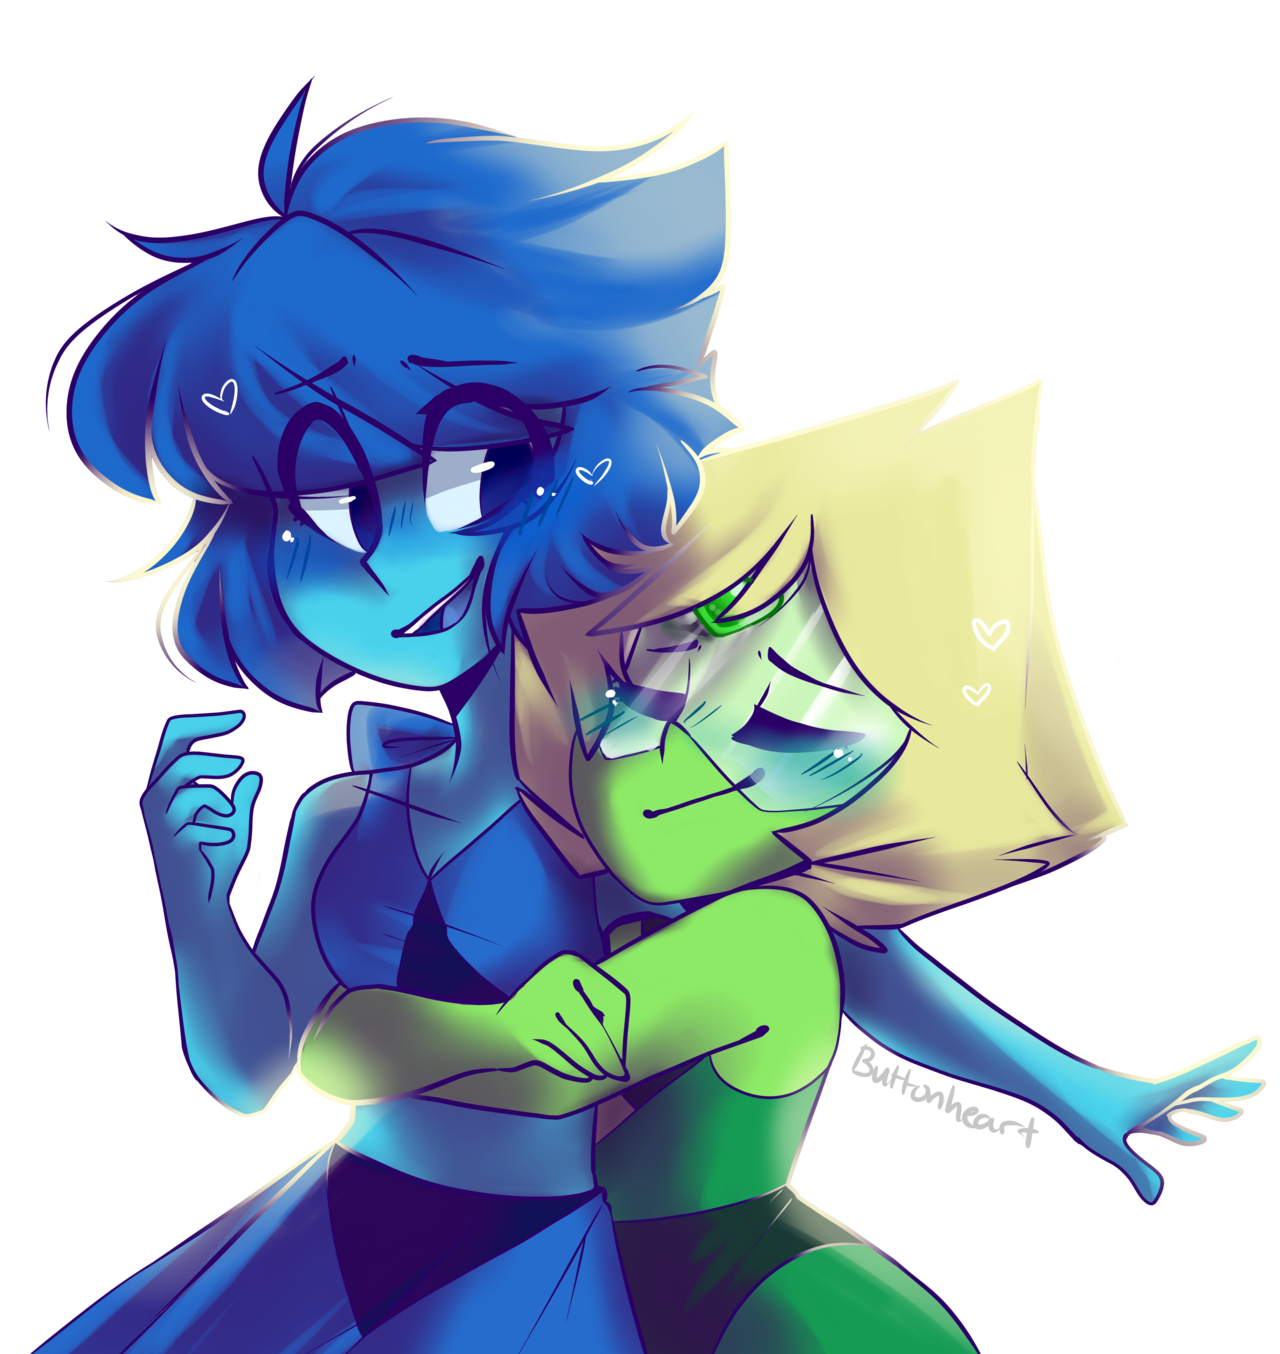 Adorable Lapidot commission for @abraxaswithaxes ! Thank you so much for commissioning me!